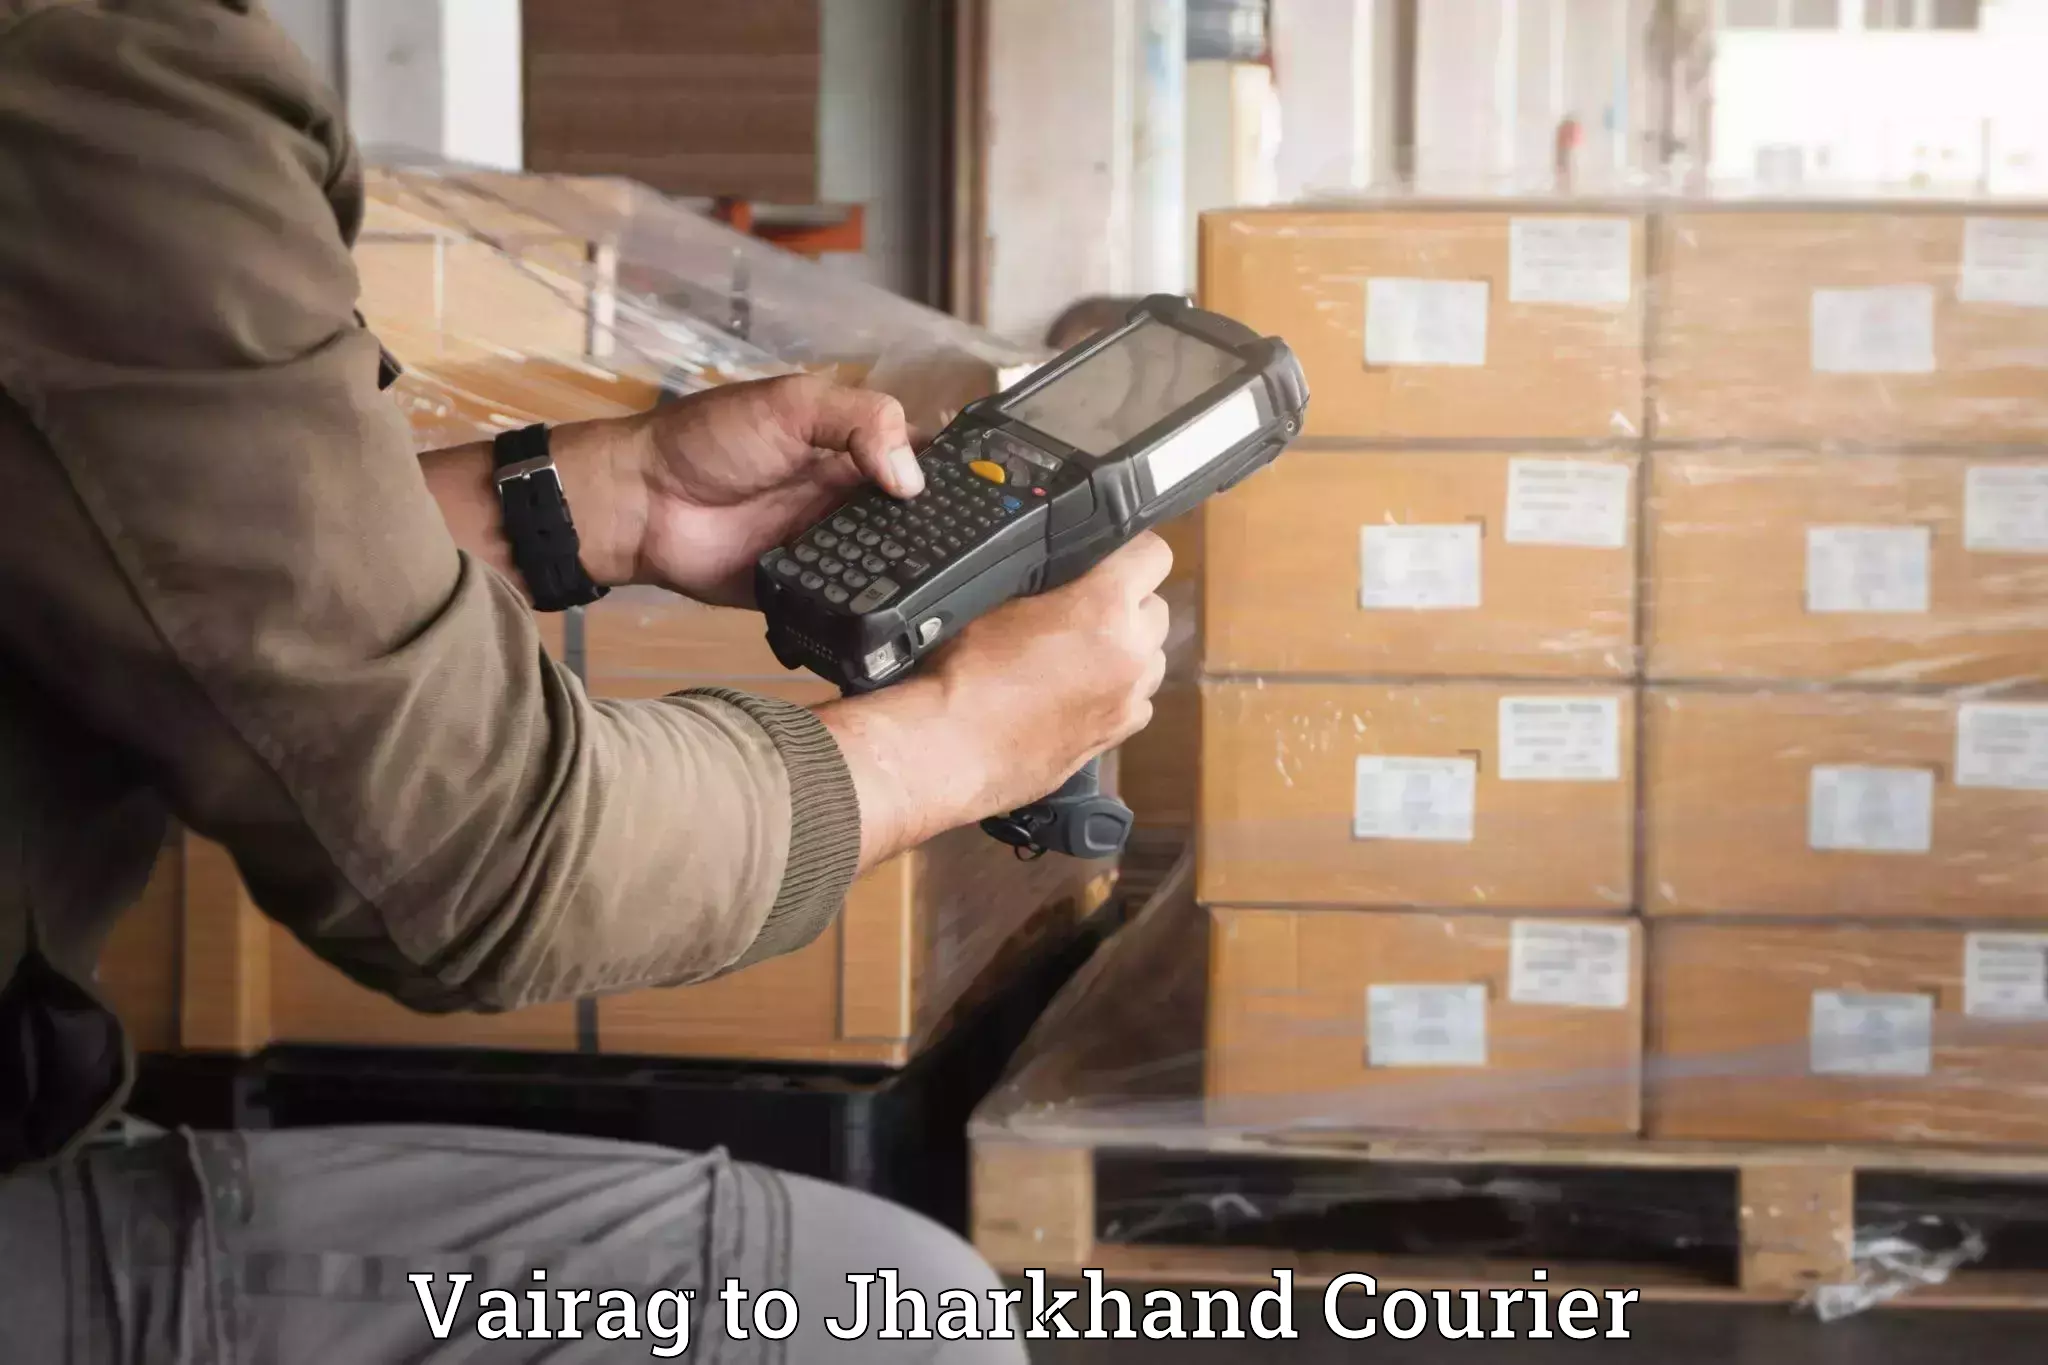 Luggage shipment specialists Vairag to Jharkhand